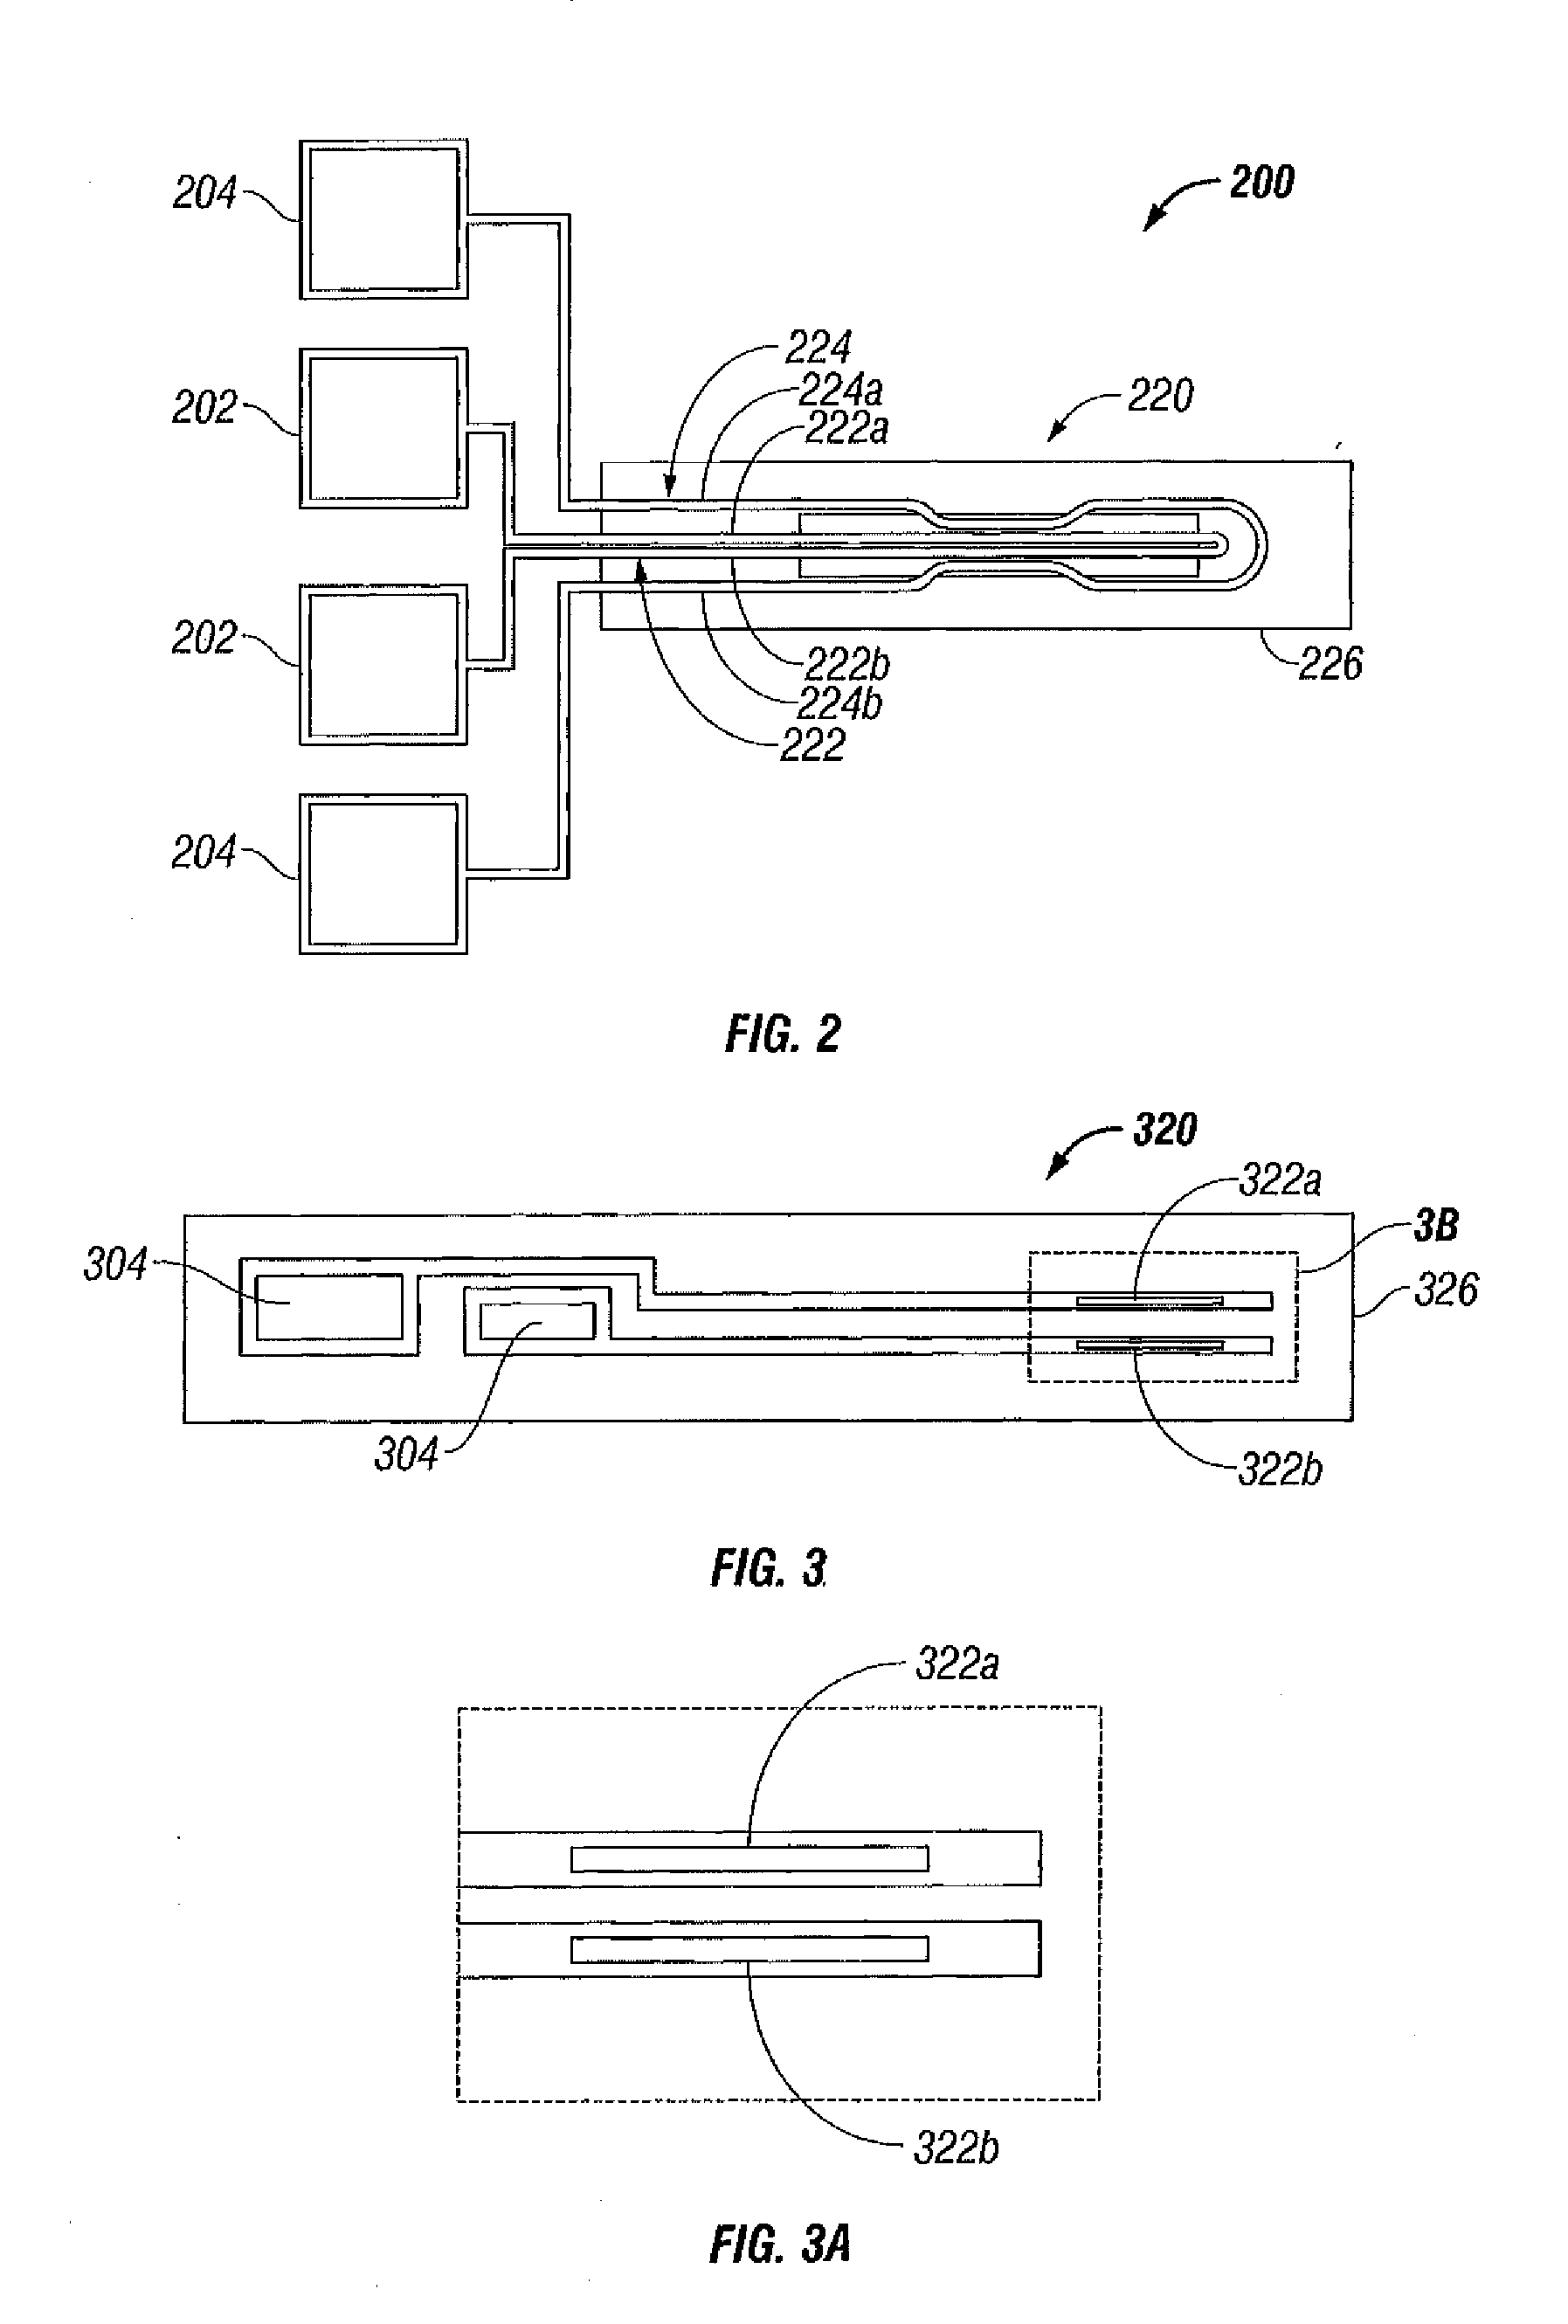 System and Method of Using Thermal and Electrical Conductivity of Tissue